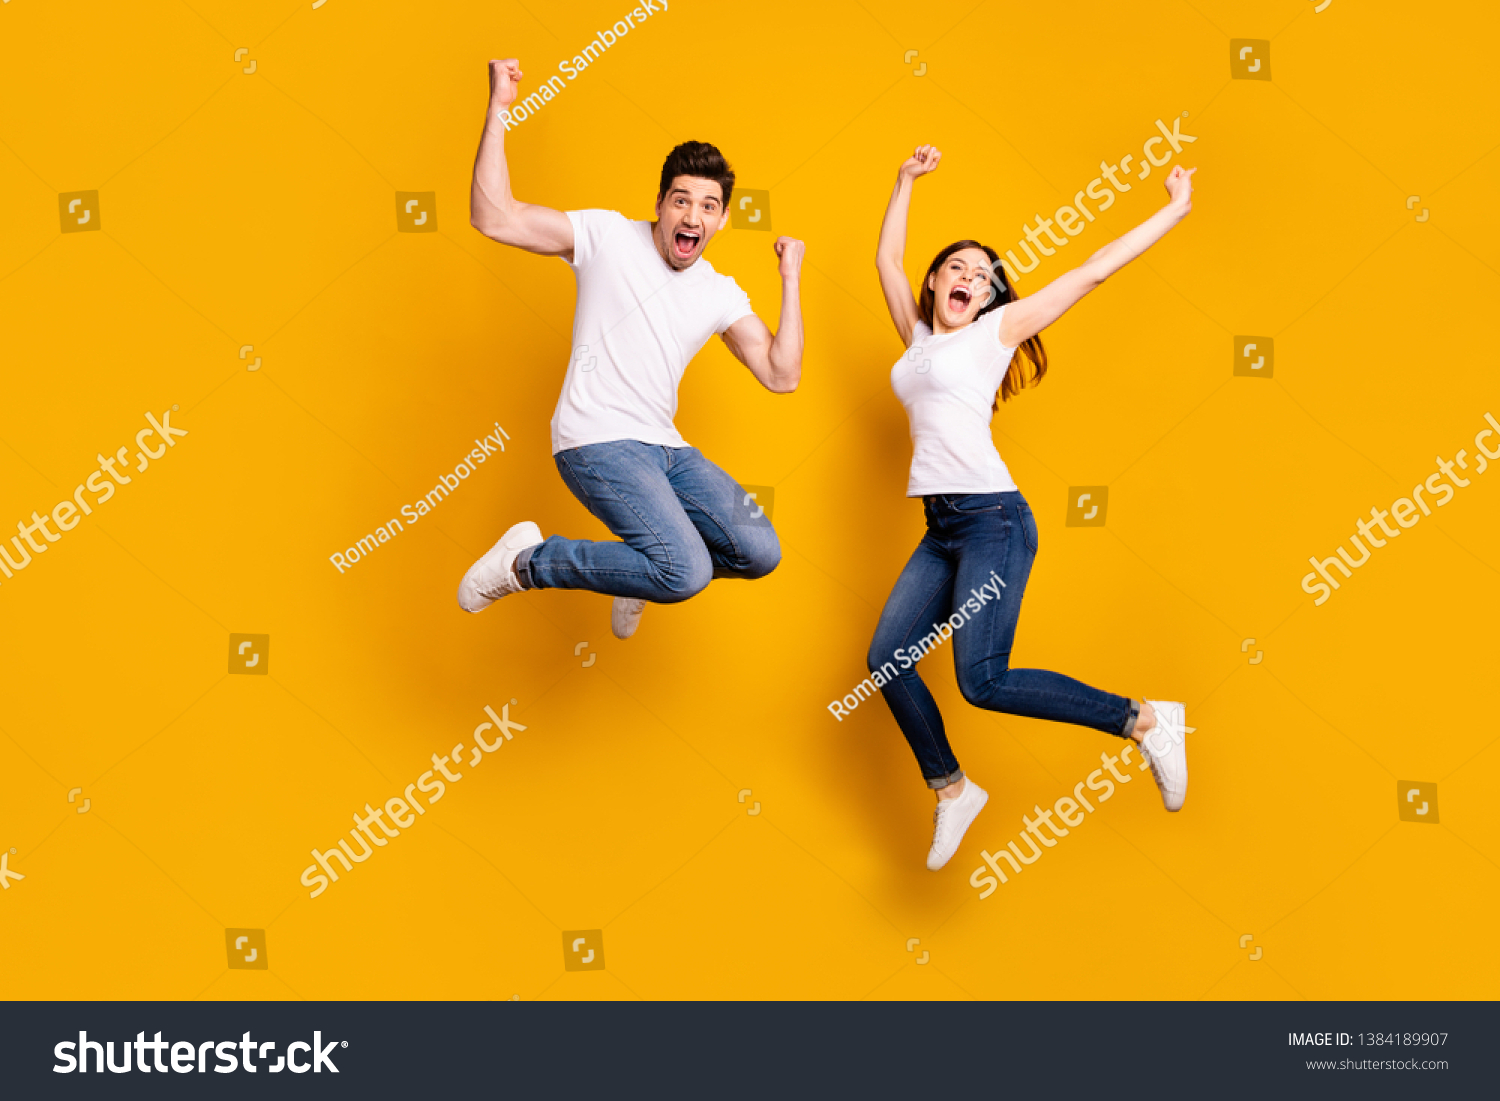 Full length body size photo funky she her he him his pair jumping high raised fists yell scream shout loud cheerleader football fans wear casual jeans denim white t-shirts isolated yellow background #1384189907